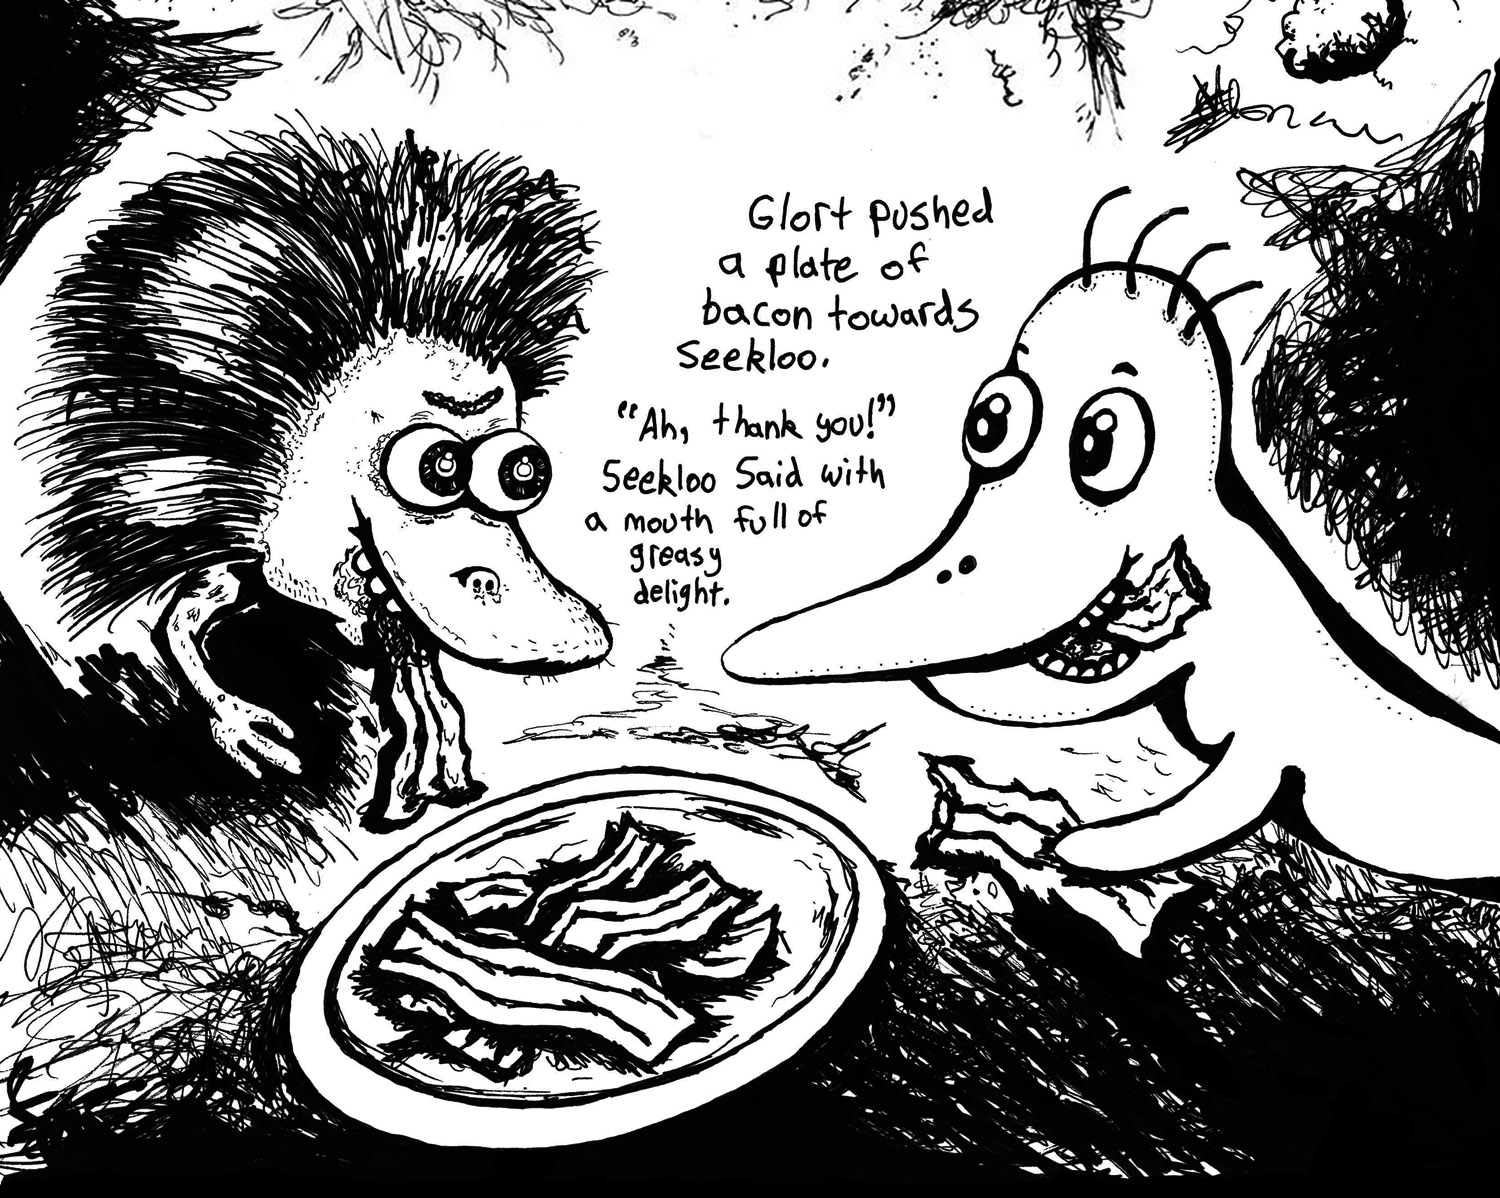 Twin Cities childrens book illustrator Josh Wallace, "Zgweebleville" Story by Josh Wallace and Jena Wallace, illustrations by Josh Wallace, ink on paper - Glort and Seekloo enjoy bacon